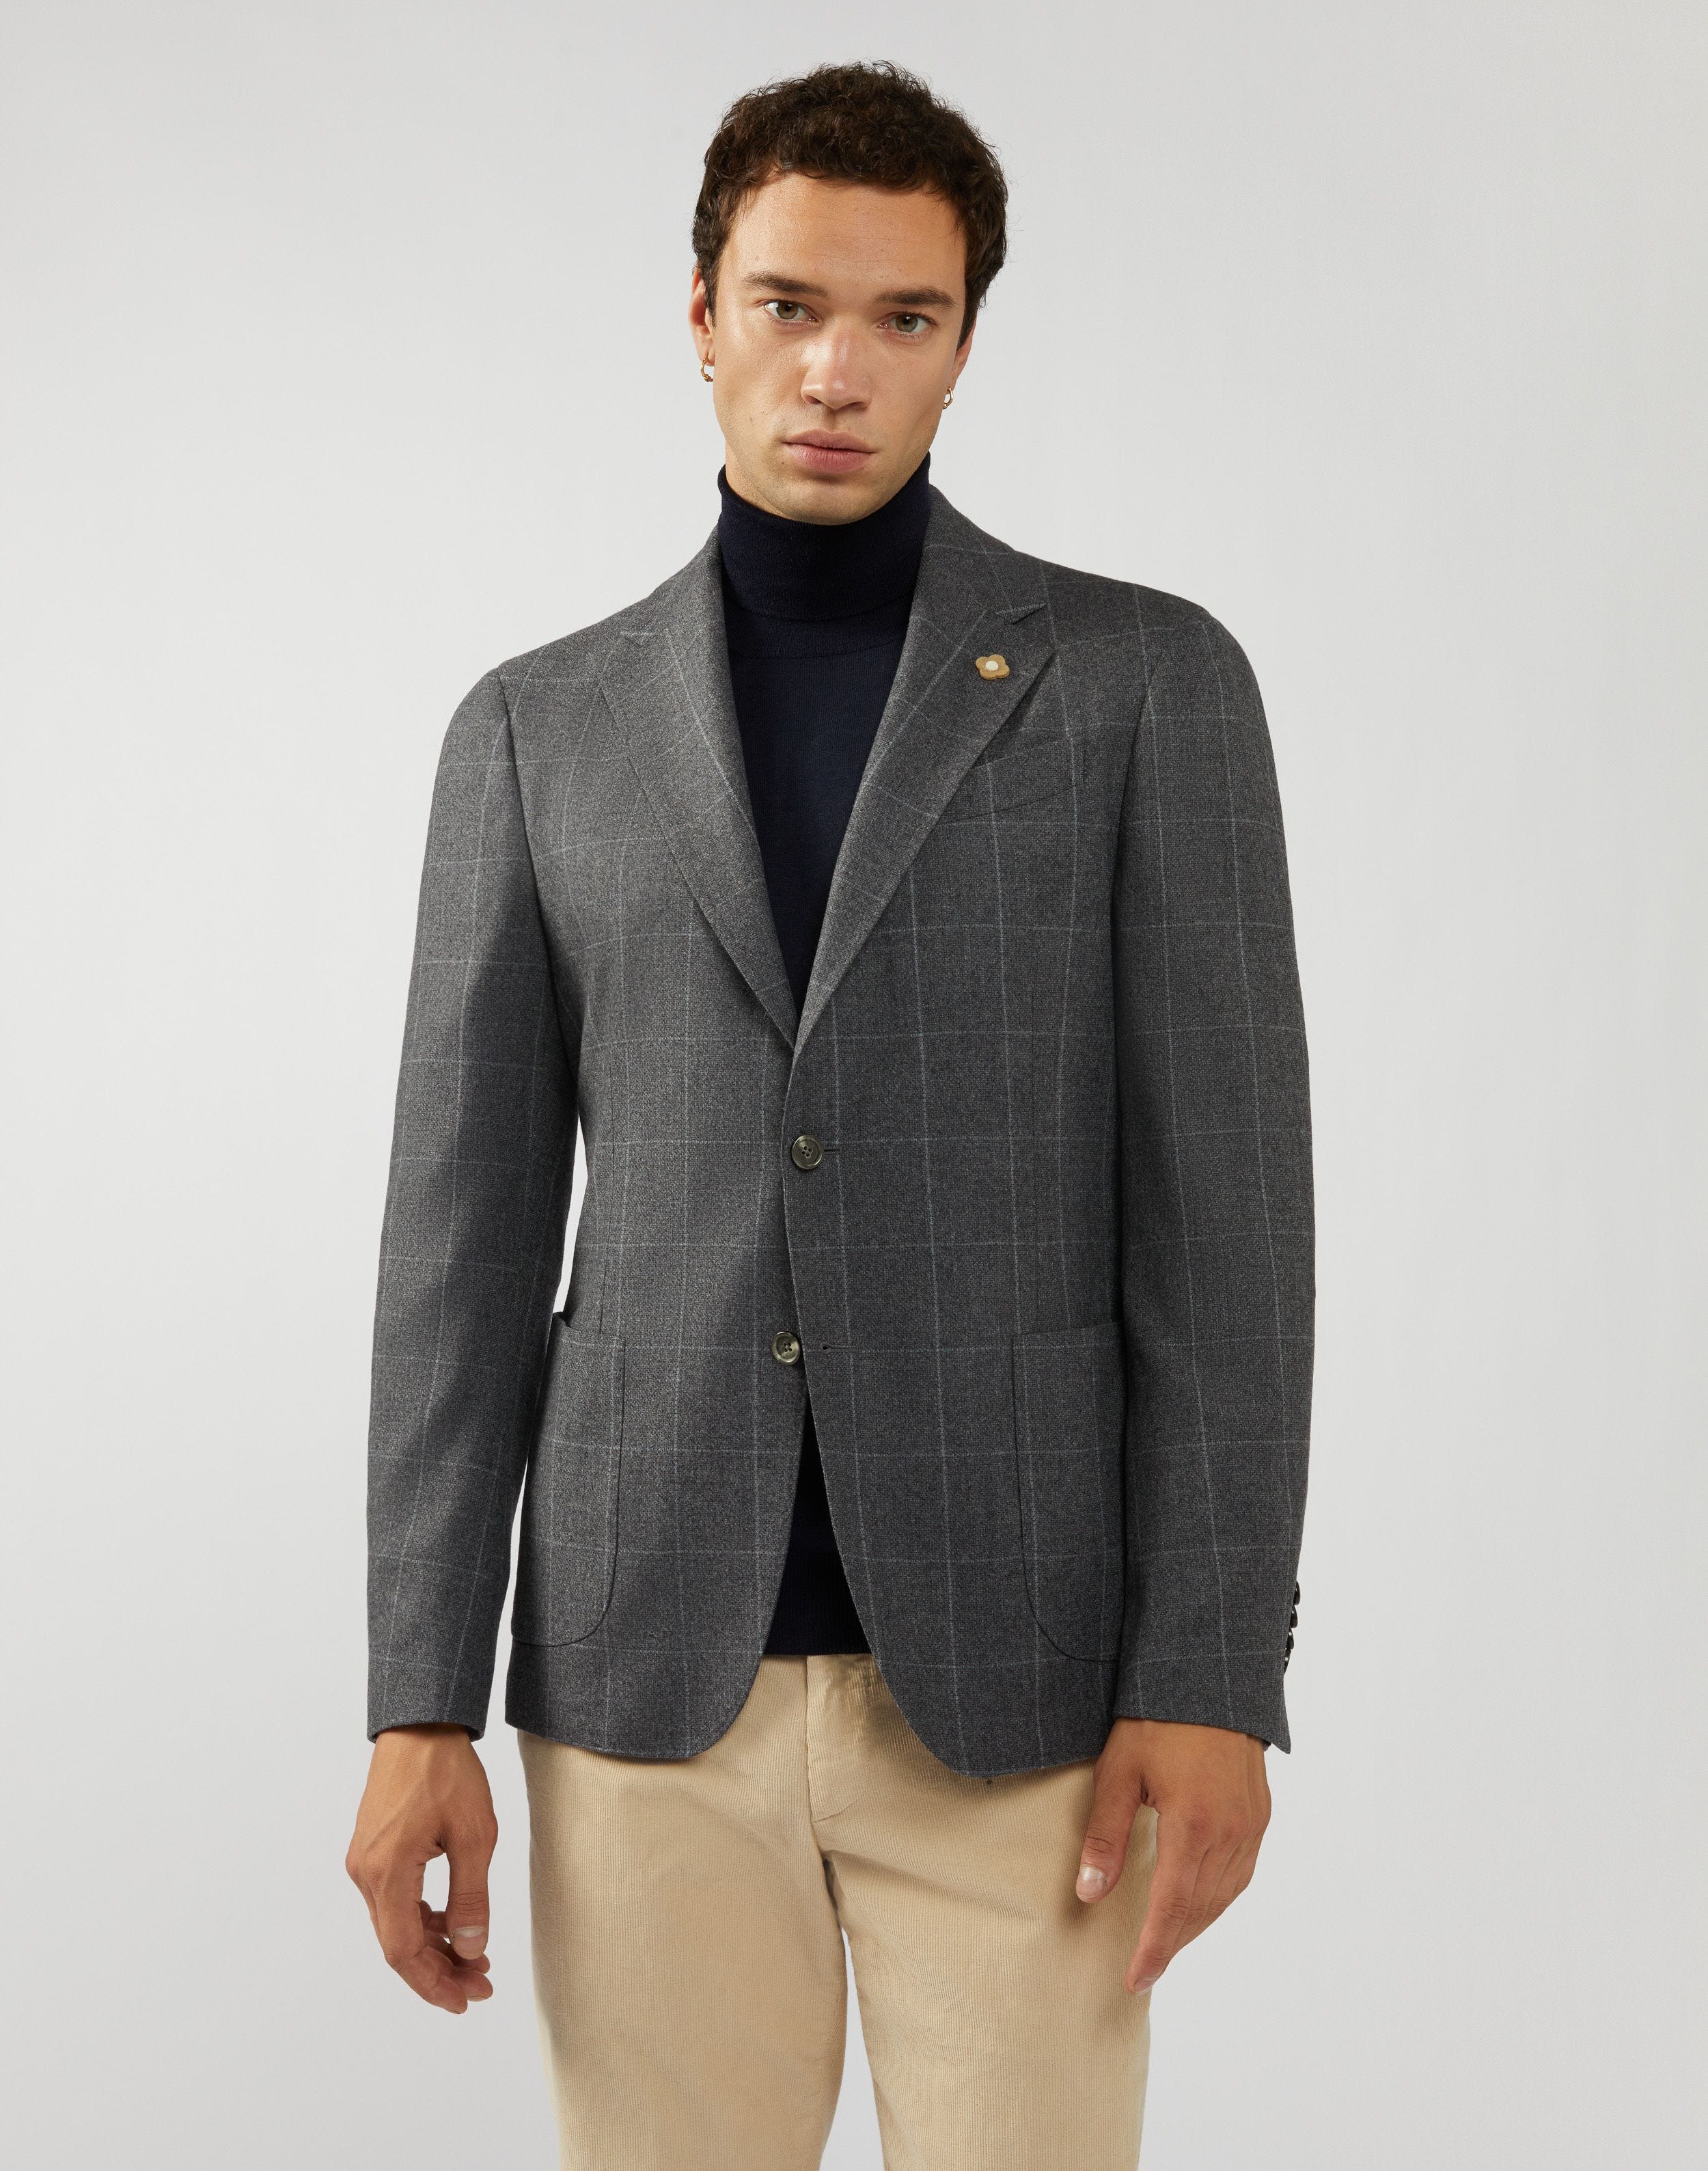 Jacket in grey wool and cashmere - Easy